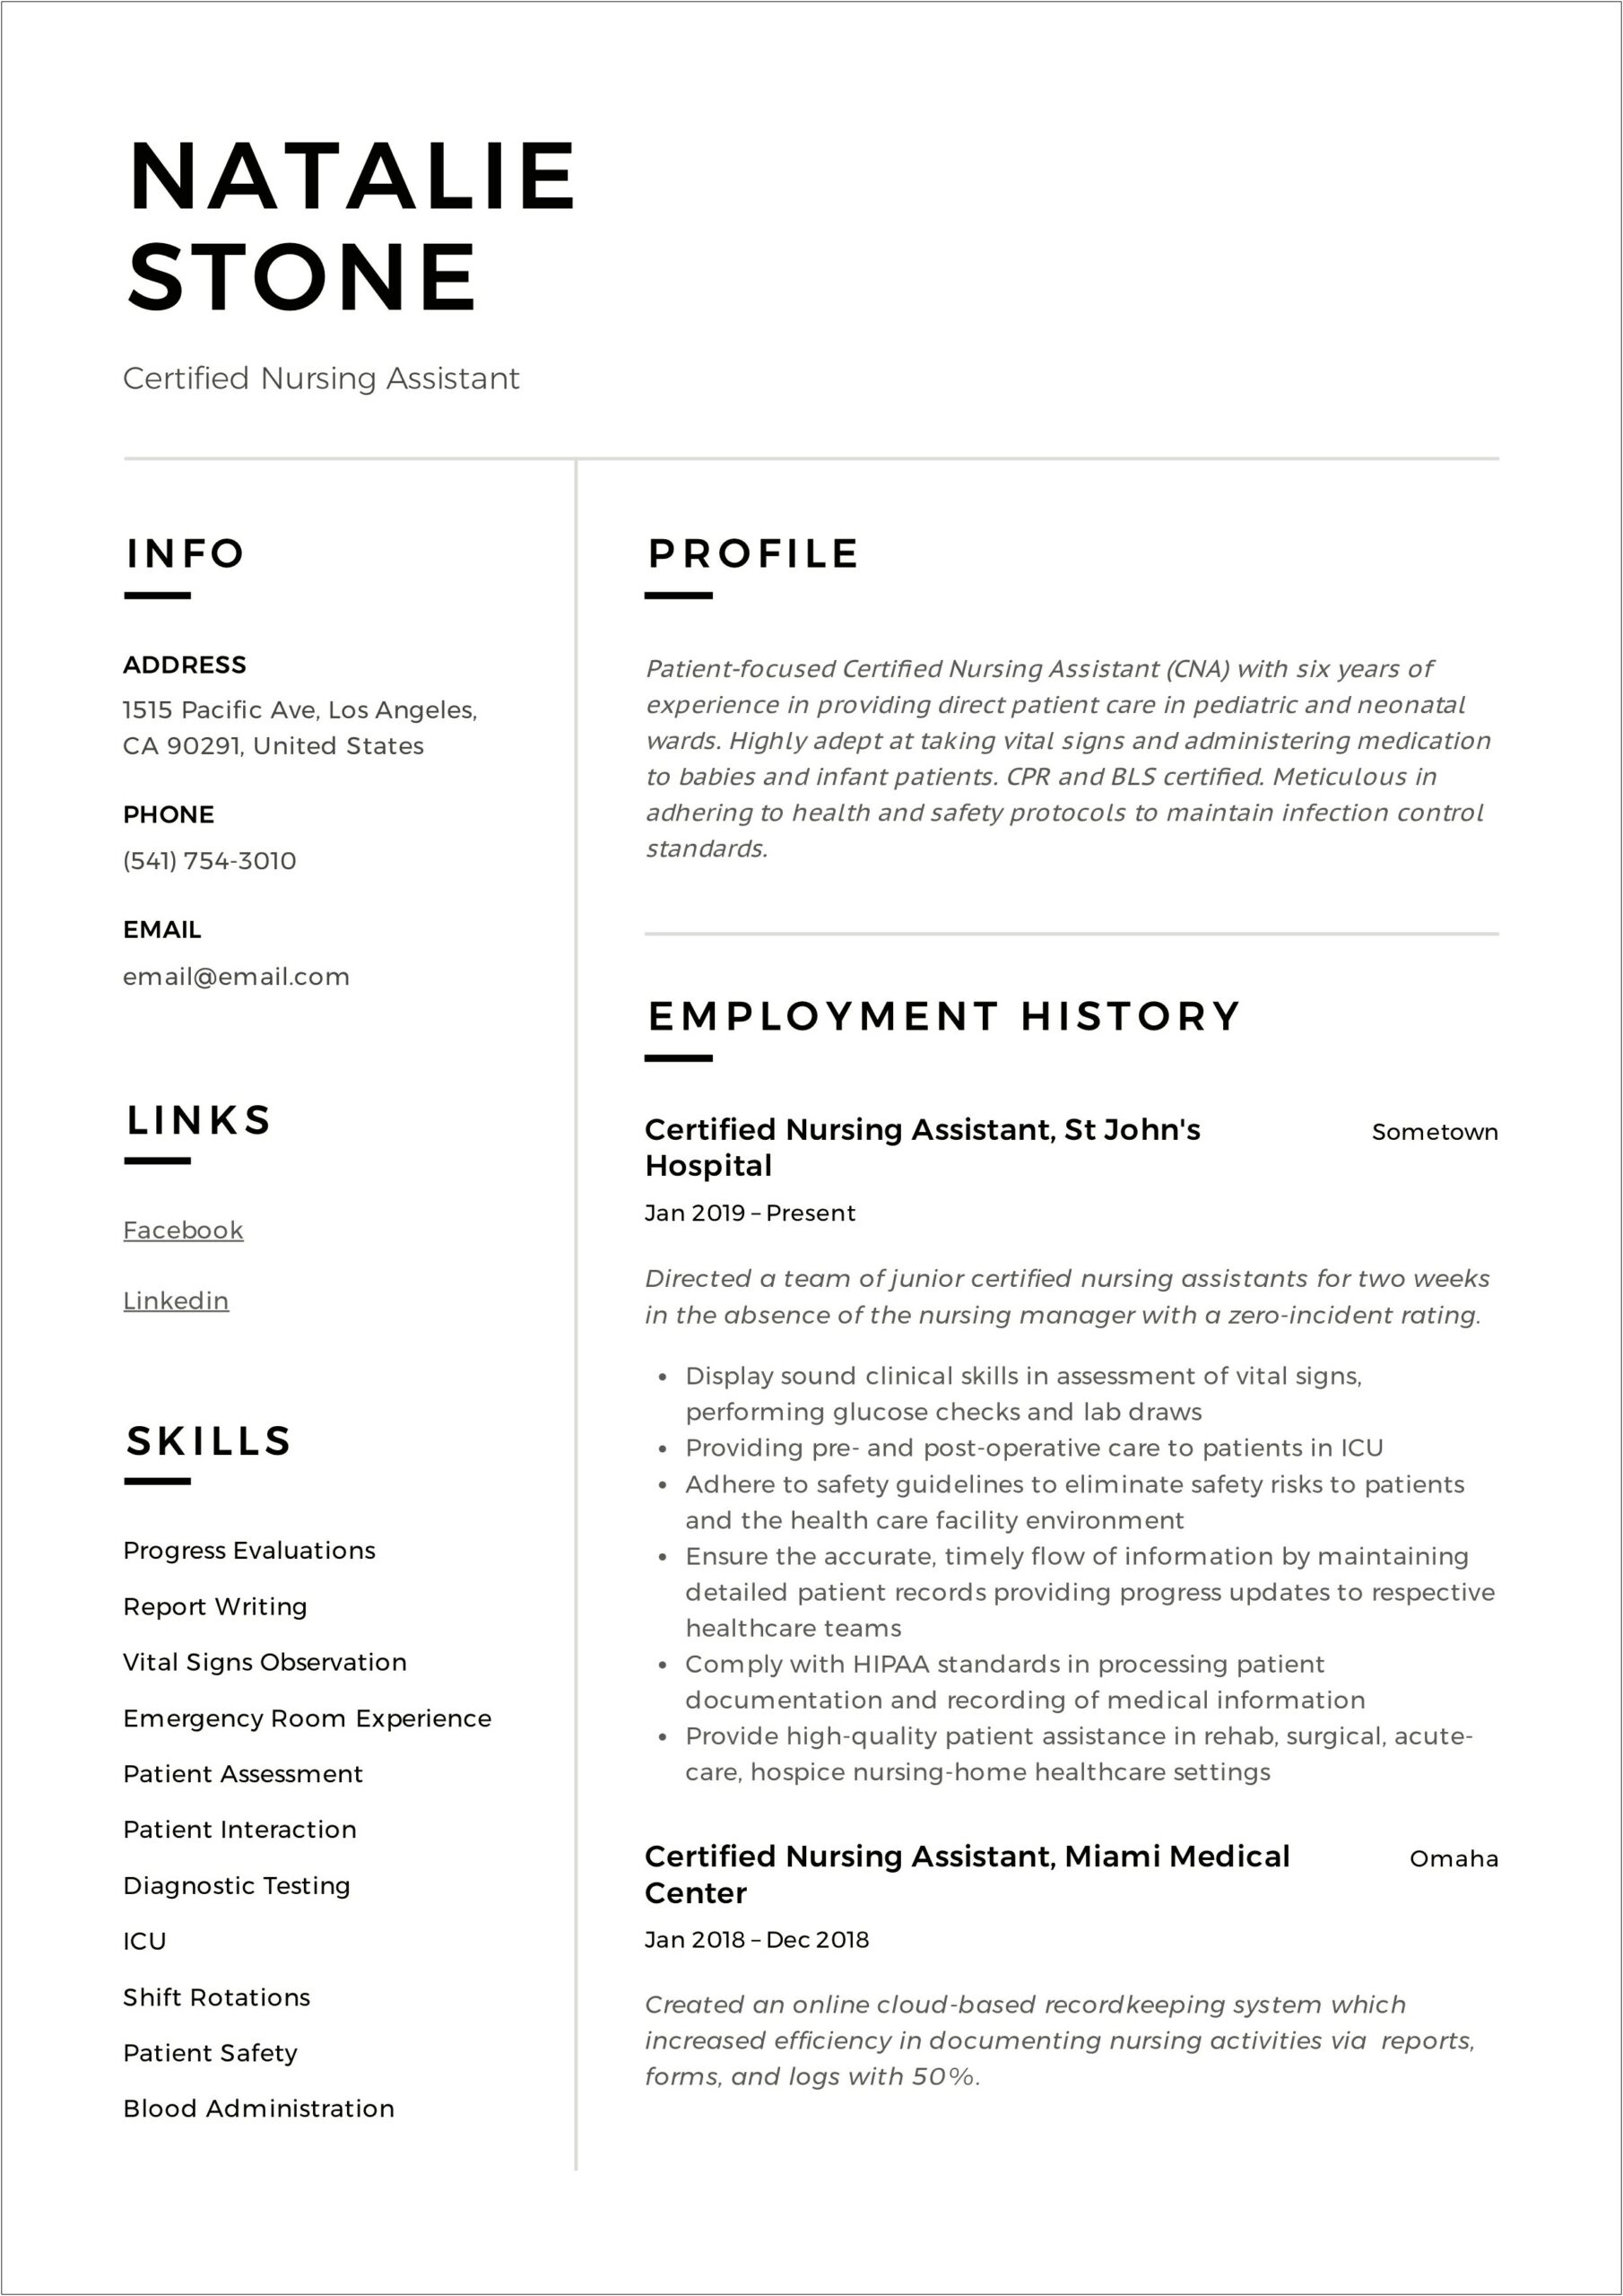 Resume Objective Examples For Certified Nursing Assistant